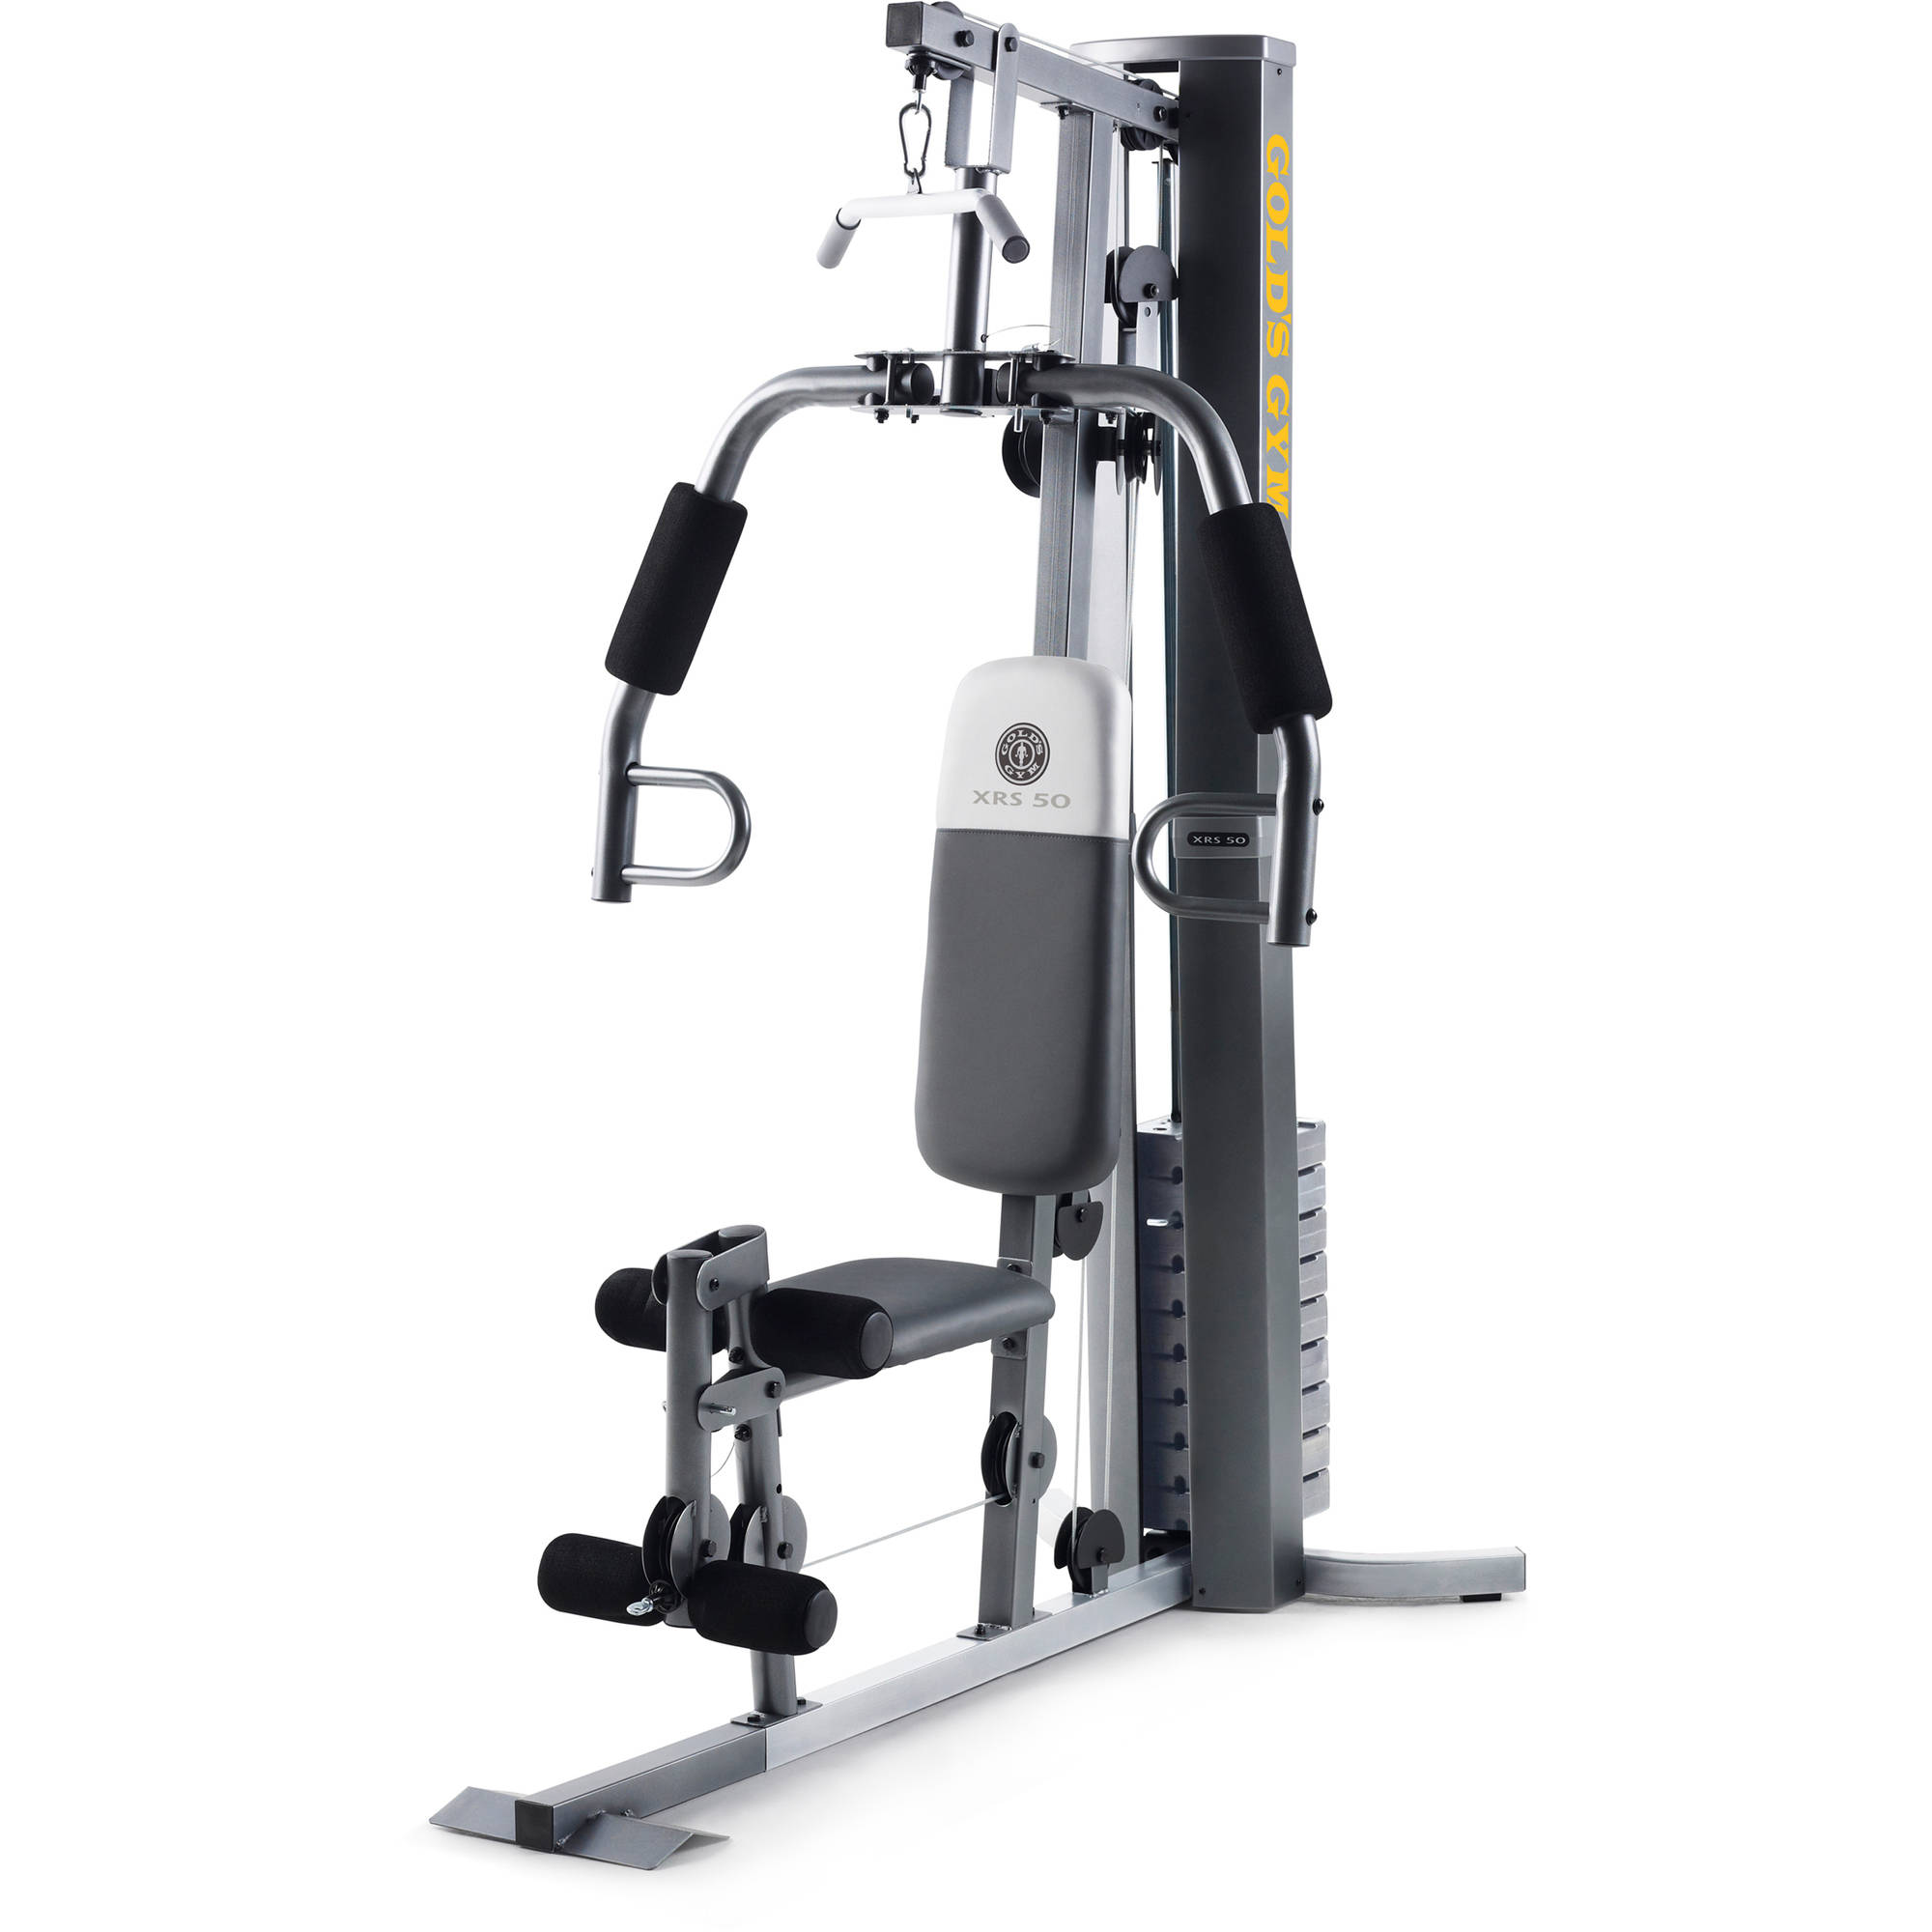 Gold’s Gym XRS 50 home gym for $197, free store pickup